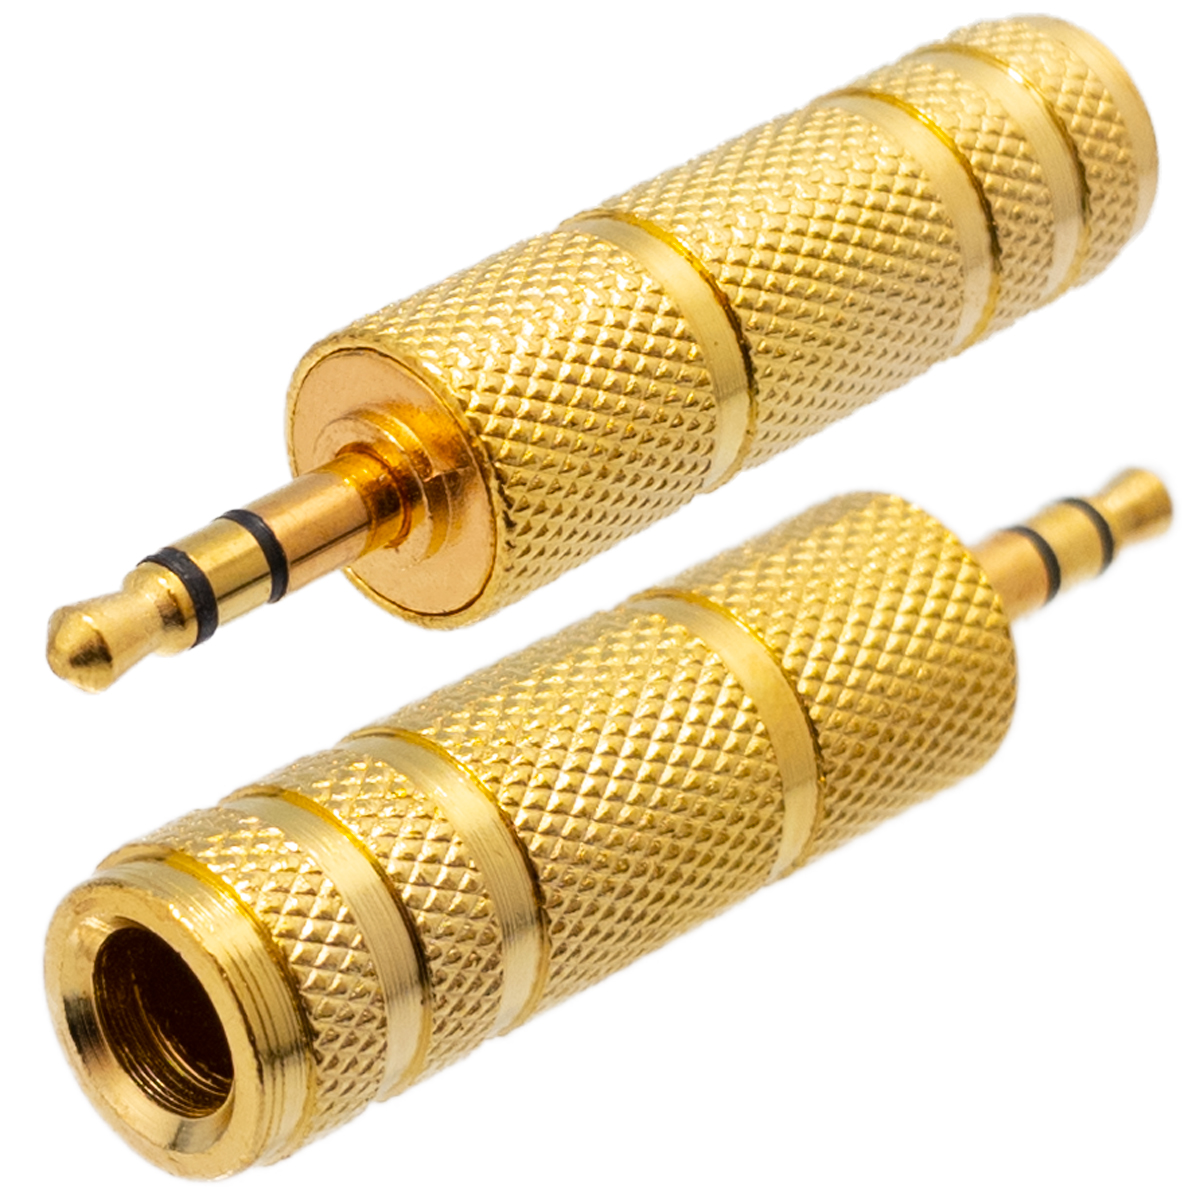 3.5mm STEREO PLUG - 6.4mm STEREO JACK, GOLD PLATED